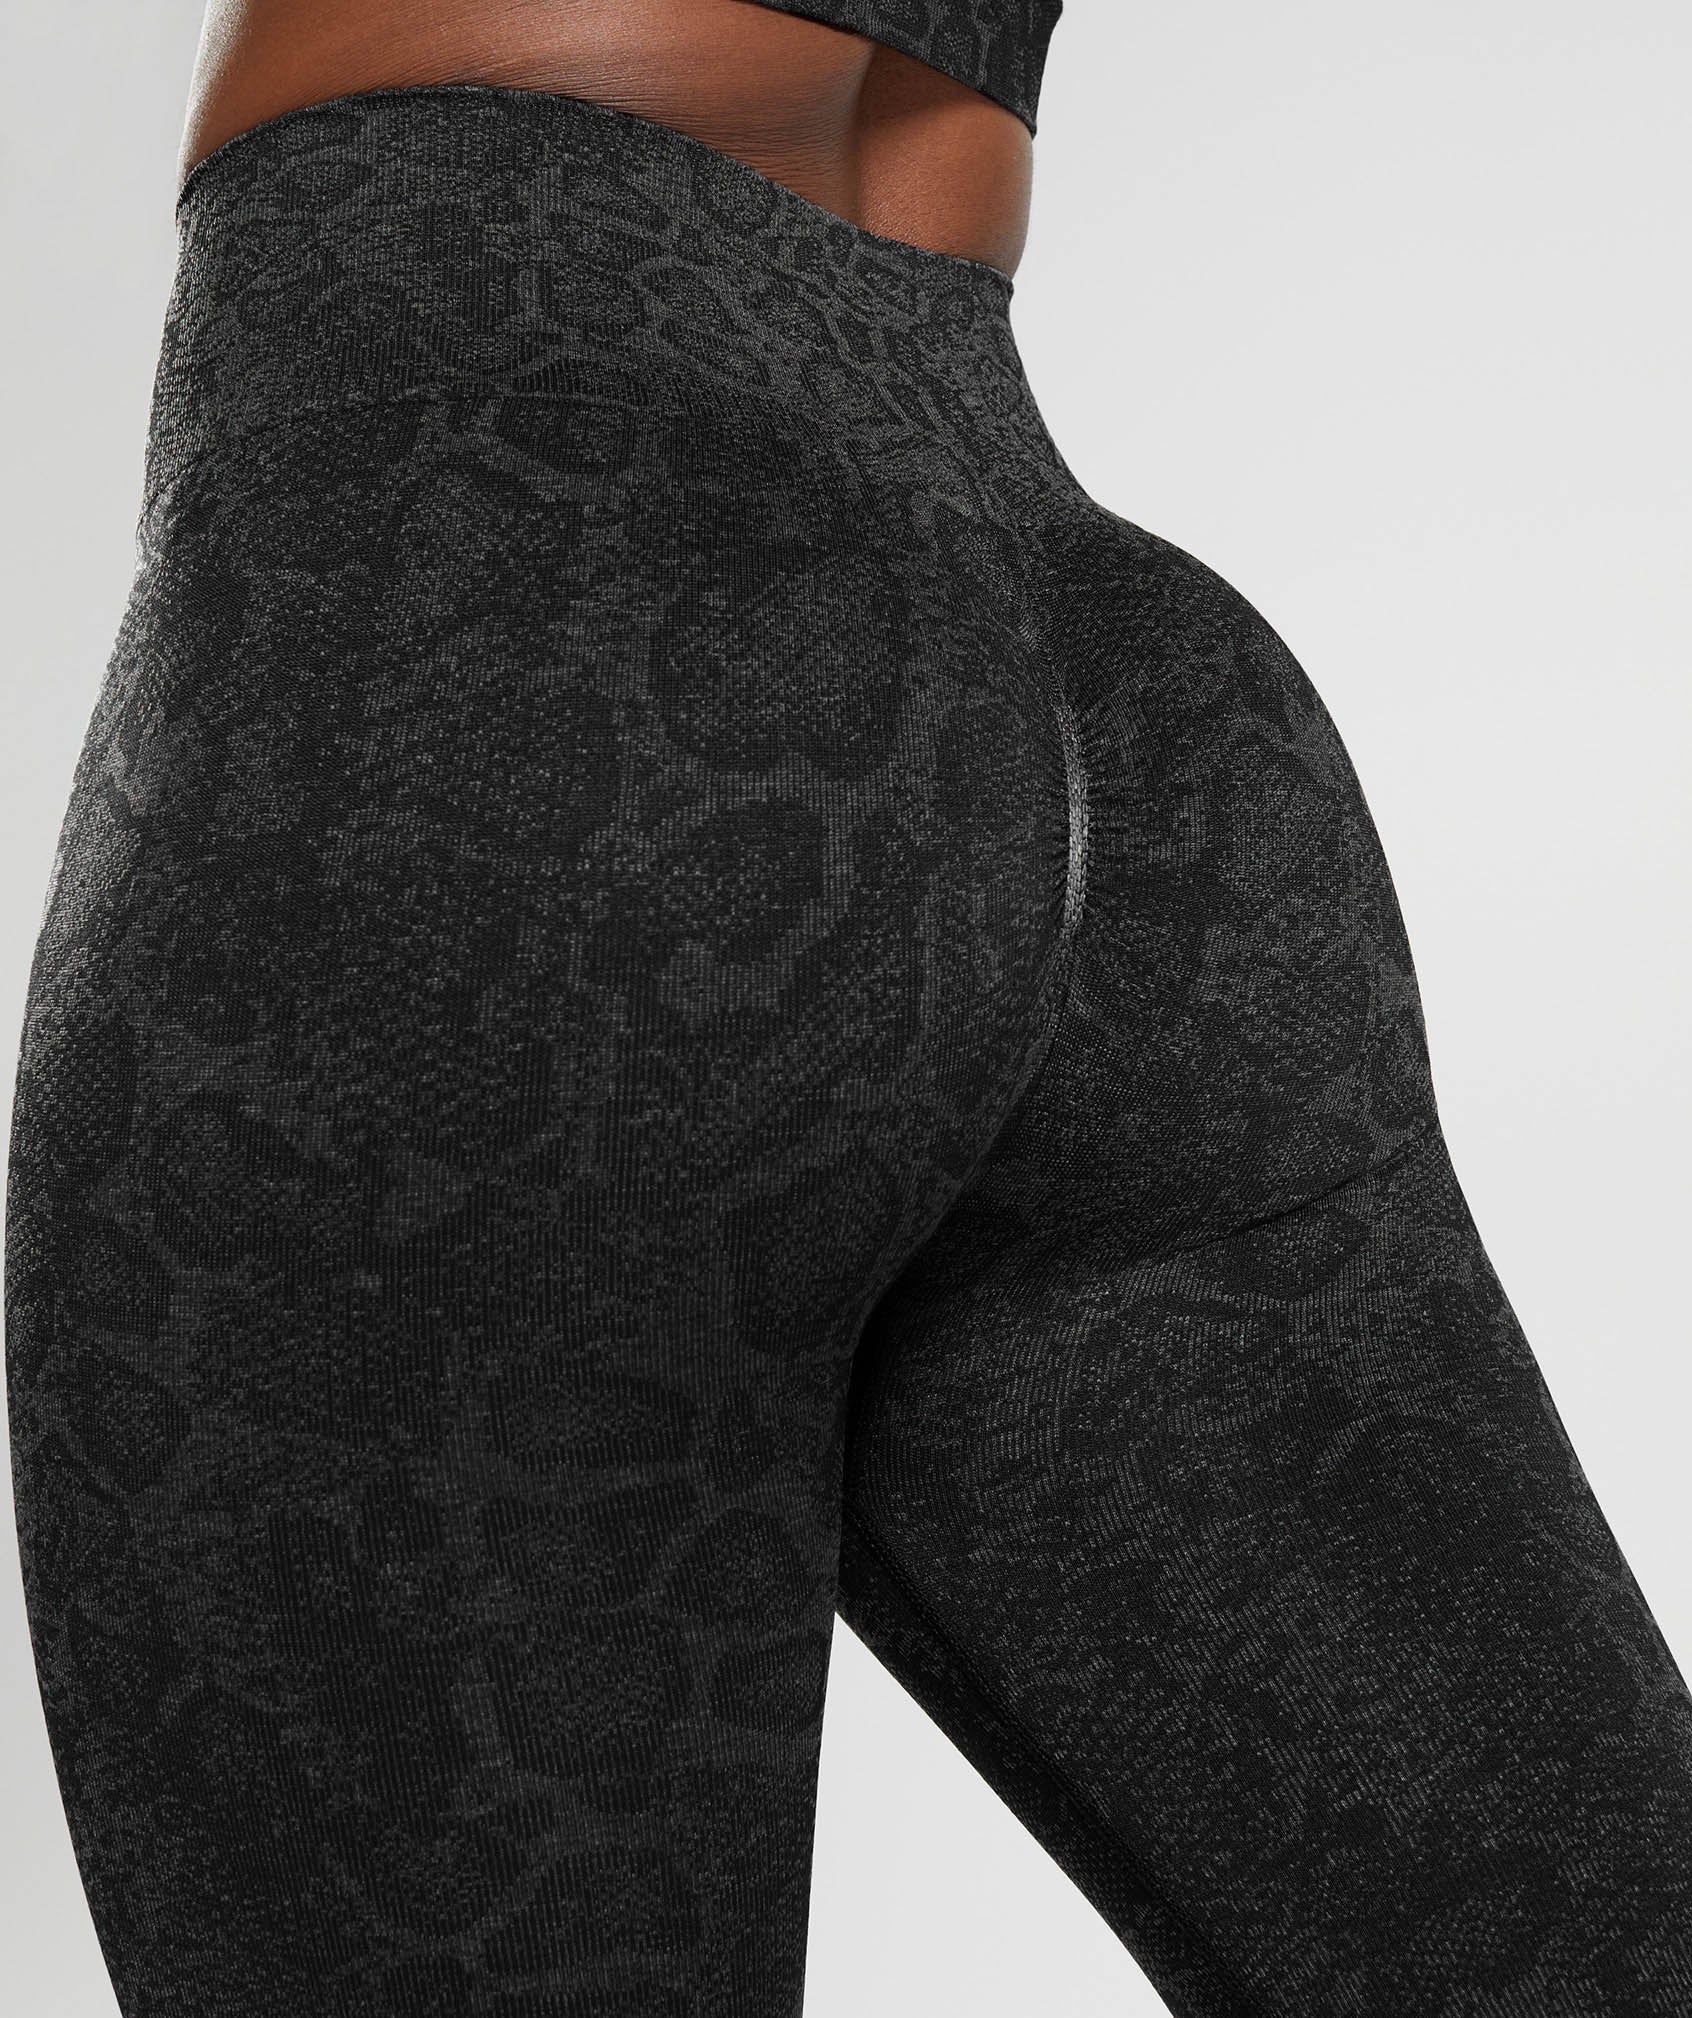 AYBL NWT animal print workout leggings Gray Size M - $25 New With Tags -  From daryl